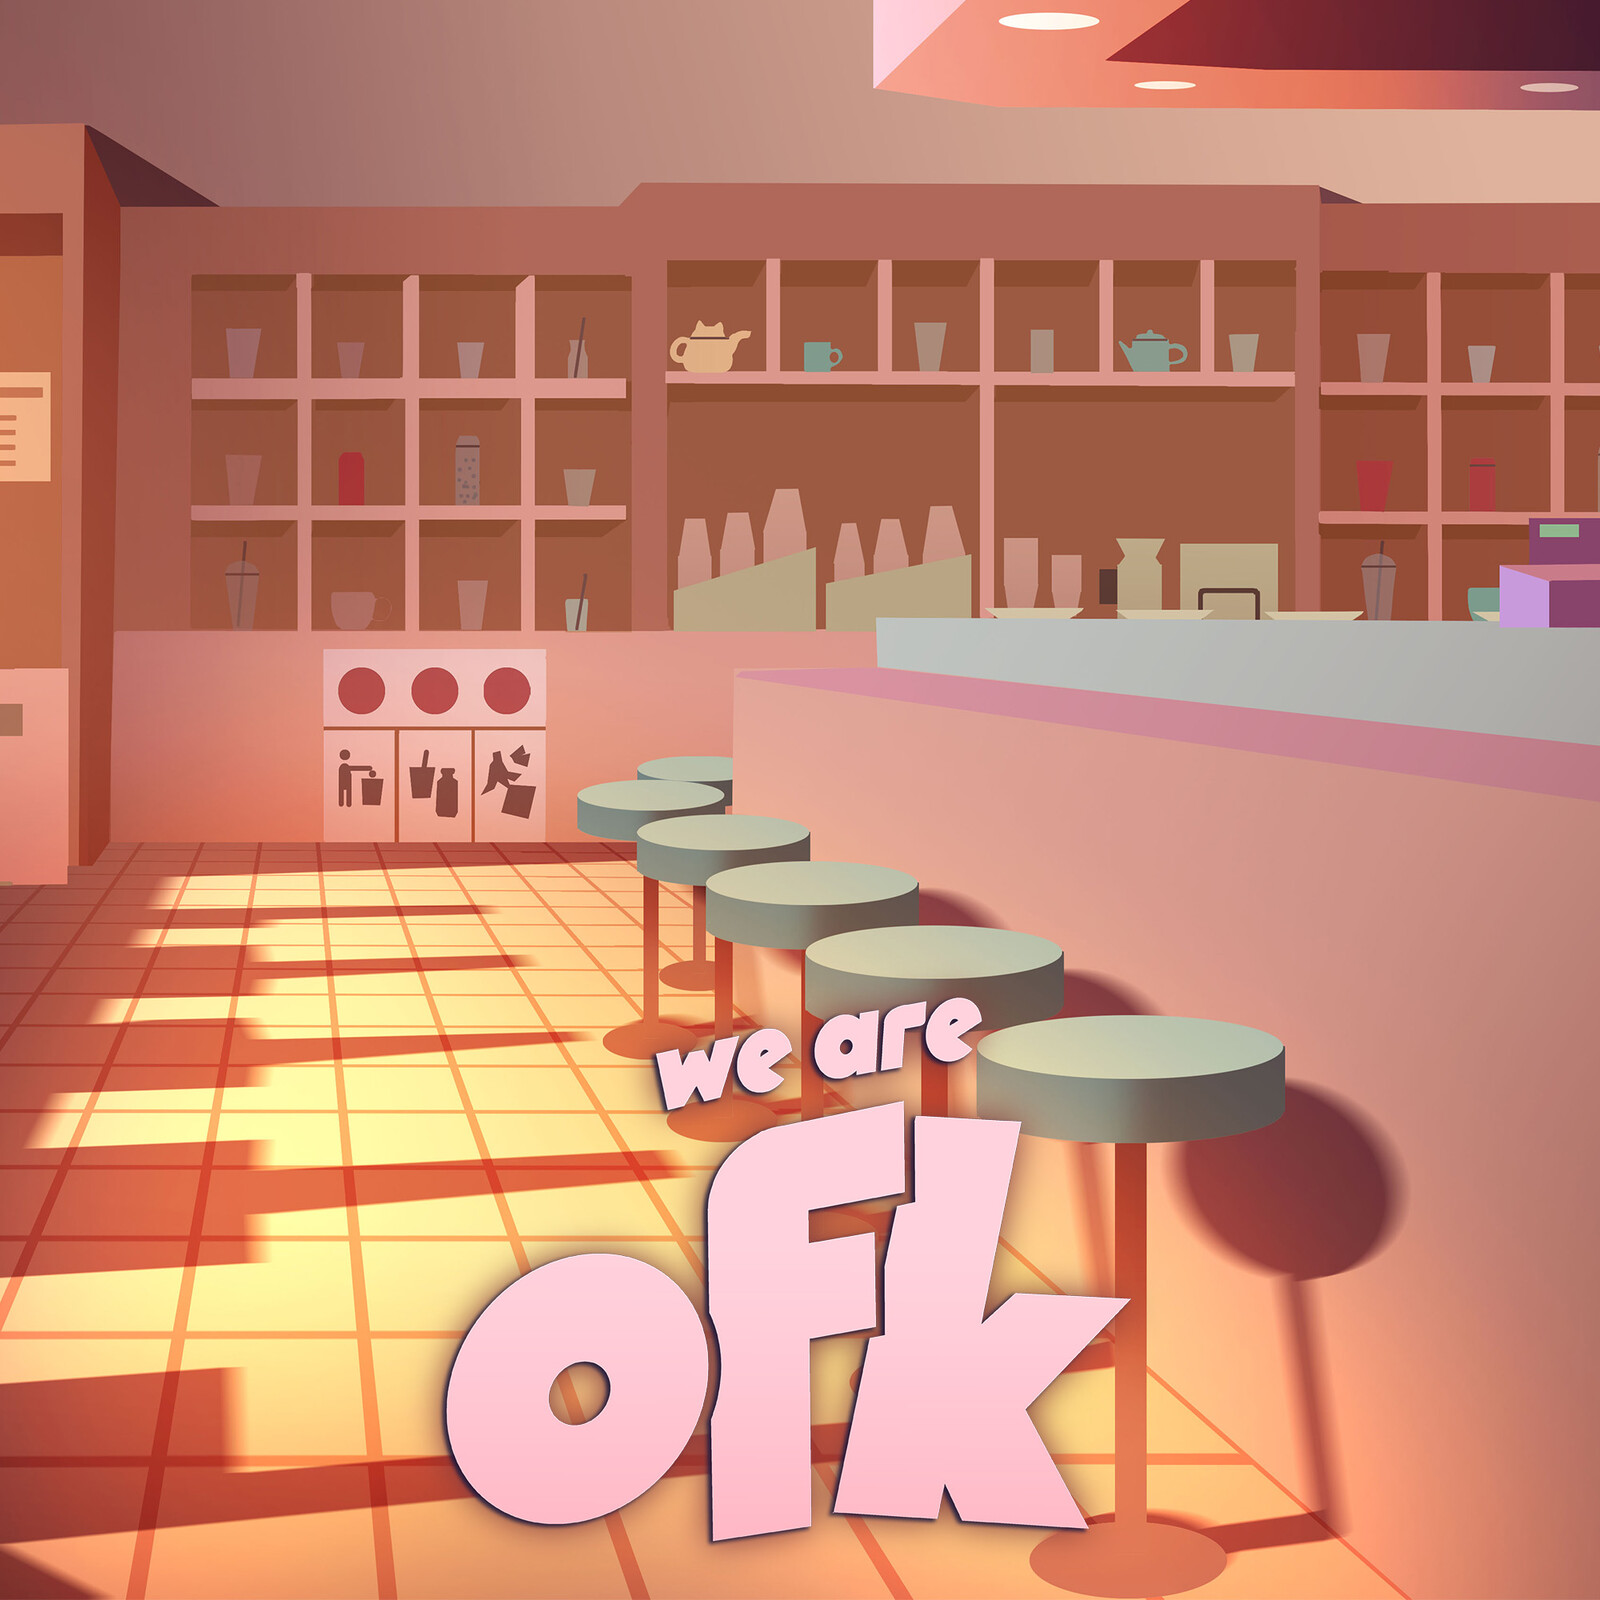 We Are OFK! Backgrounds &amp; Color Keys